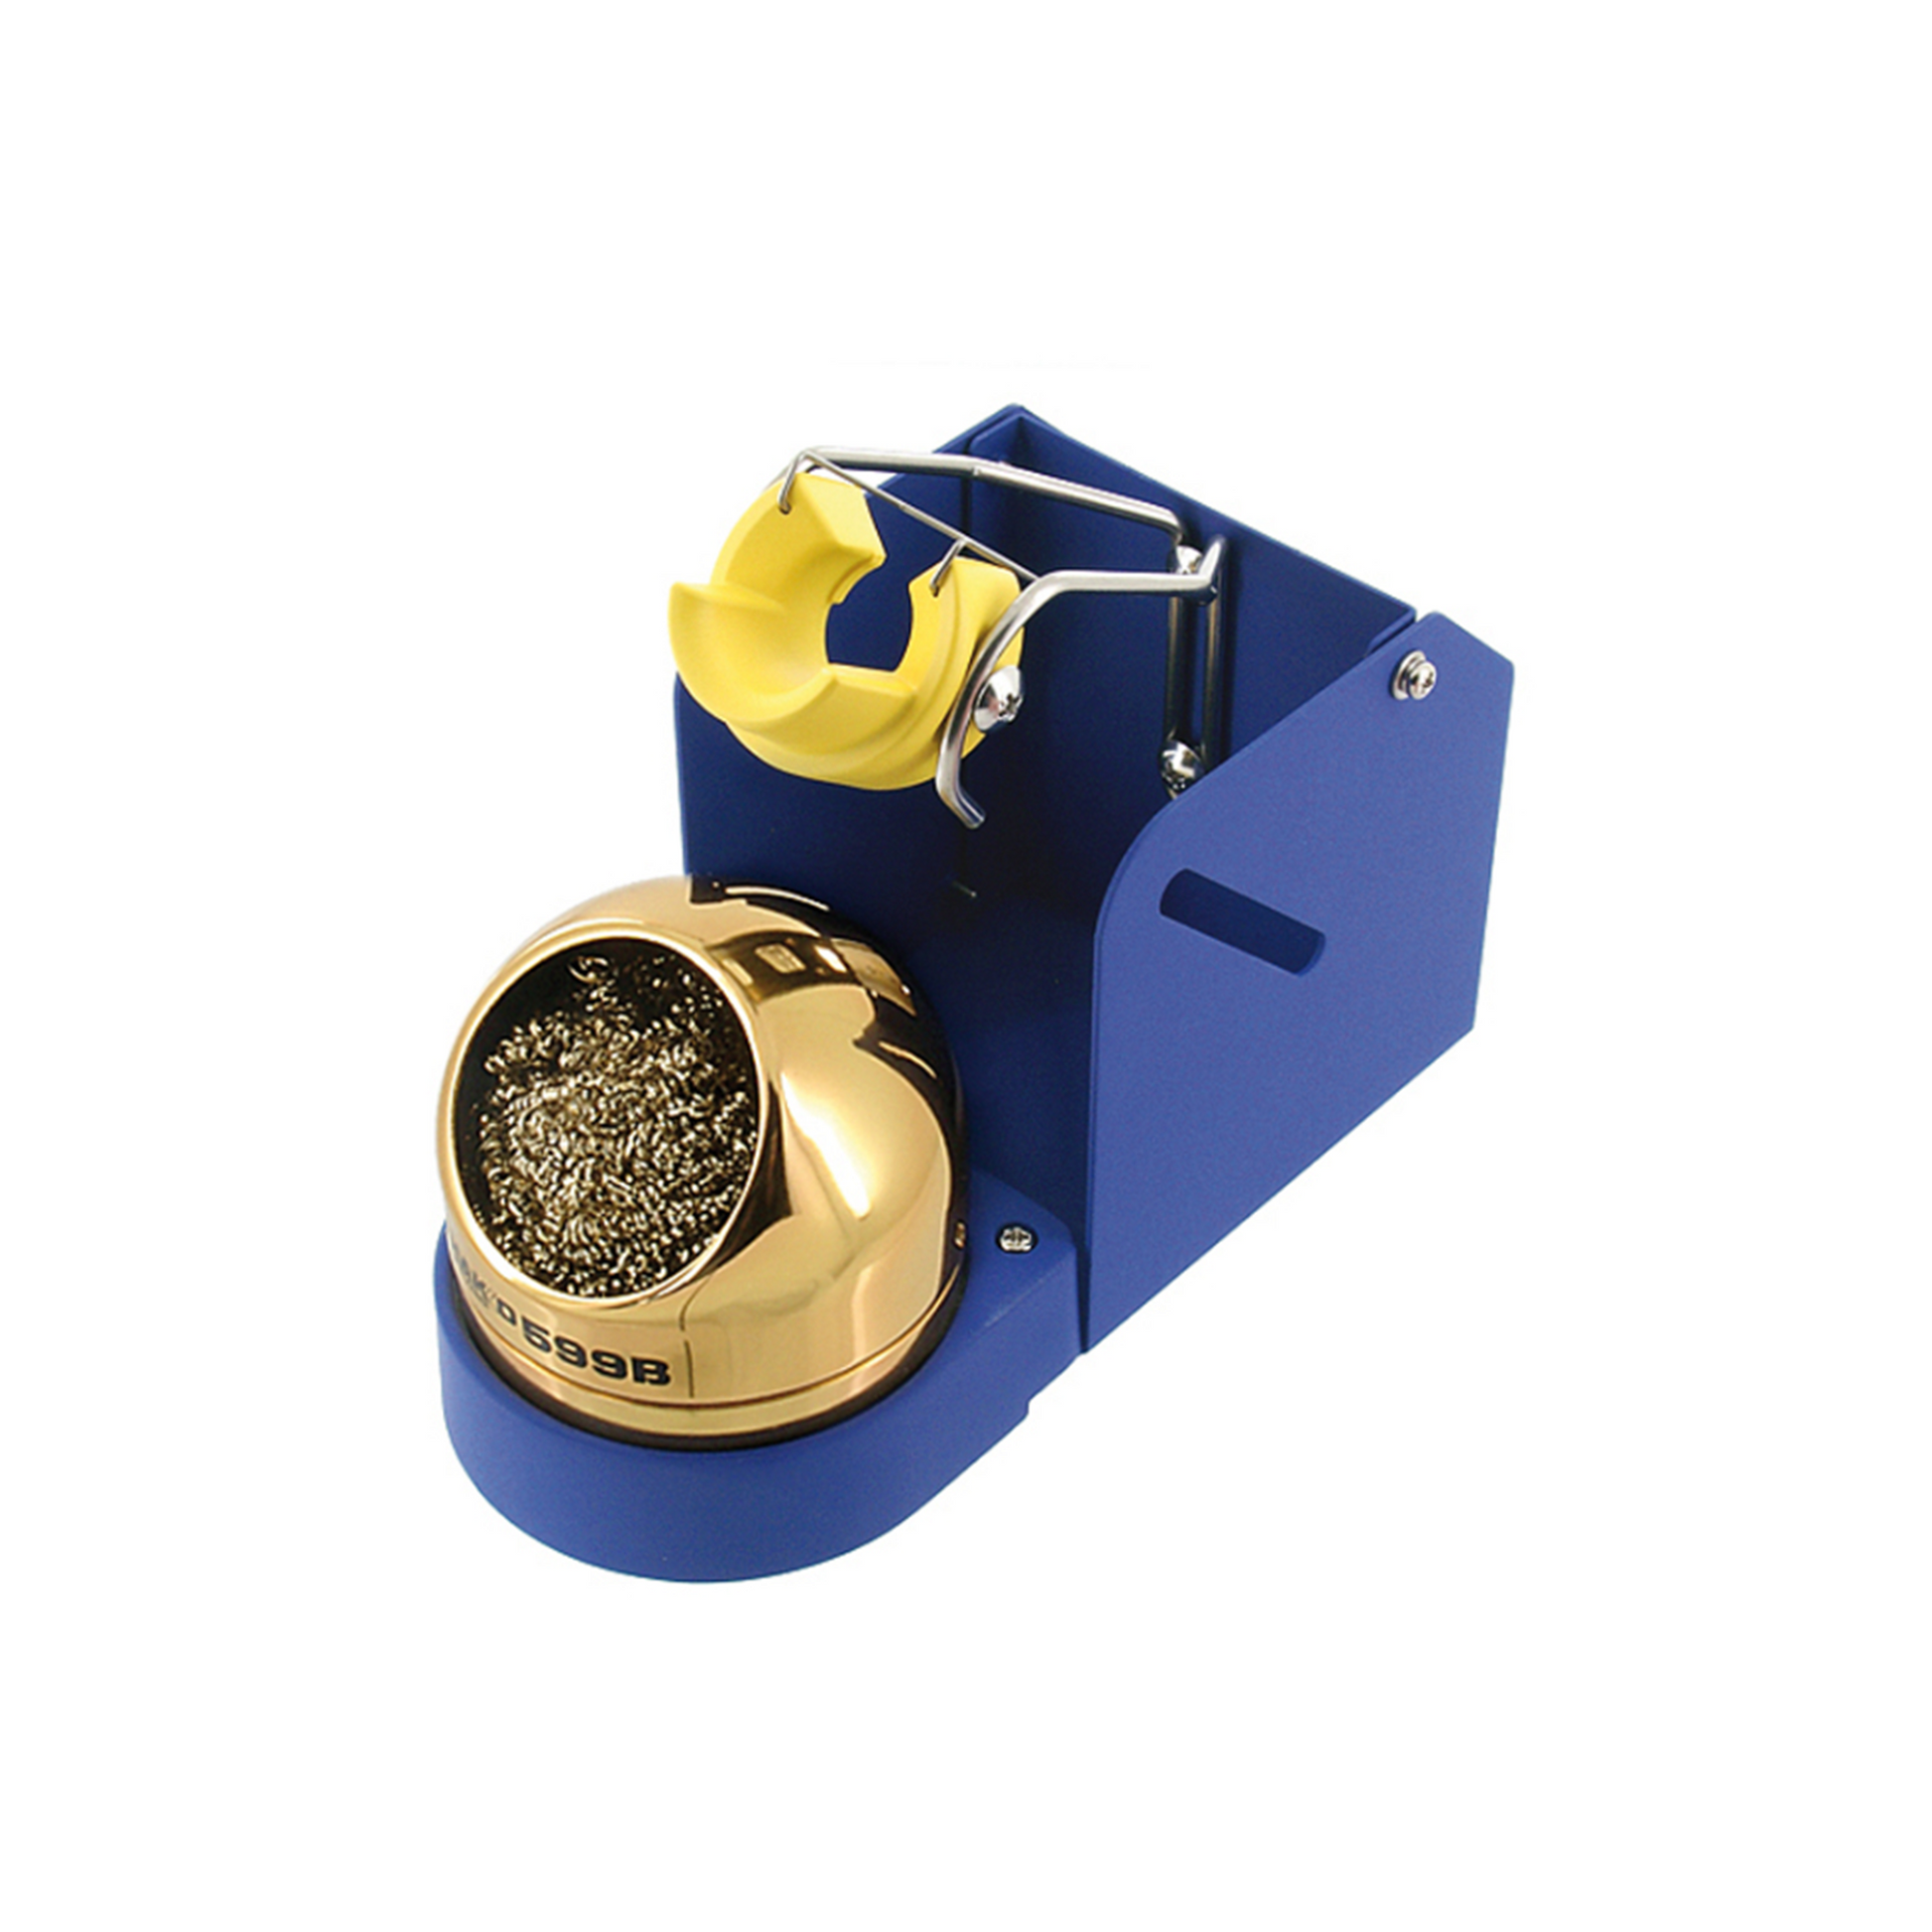 Hakko Products_ FH200-01 Iron Holder with Cleaning Wire_ Iron Holder/Stand_ Hakko Products